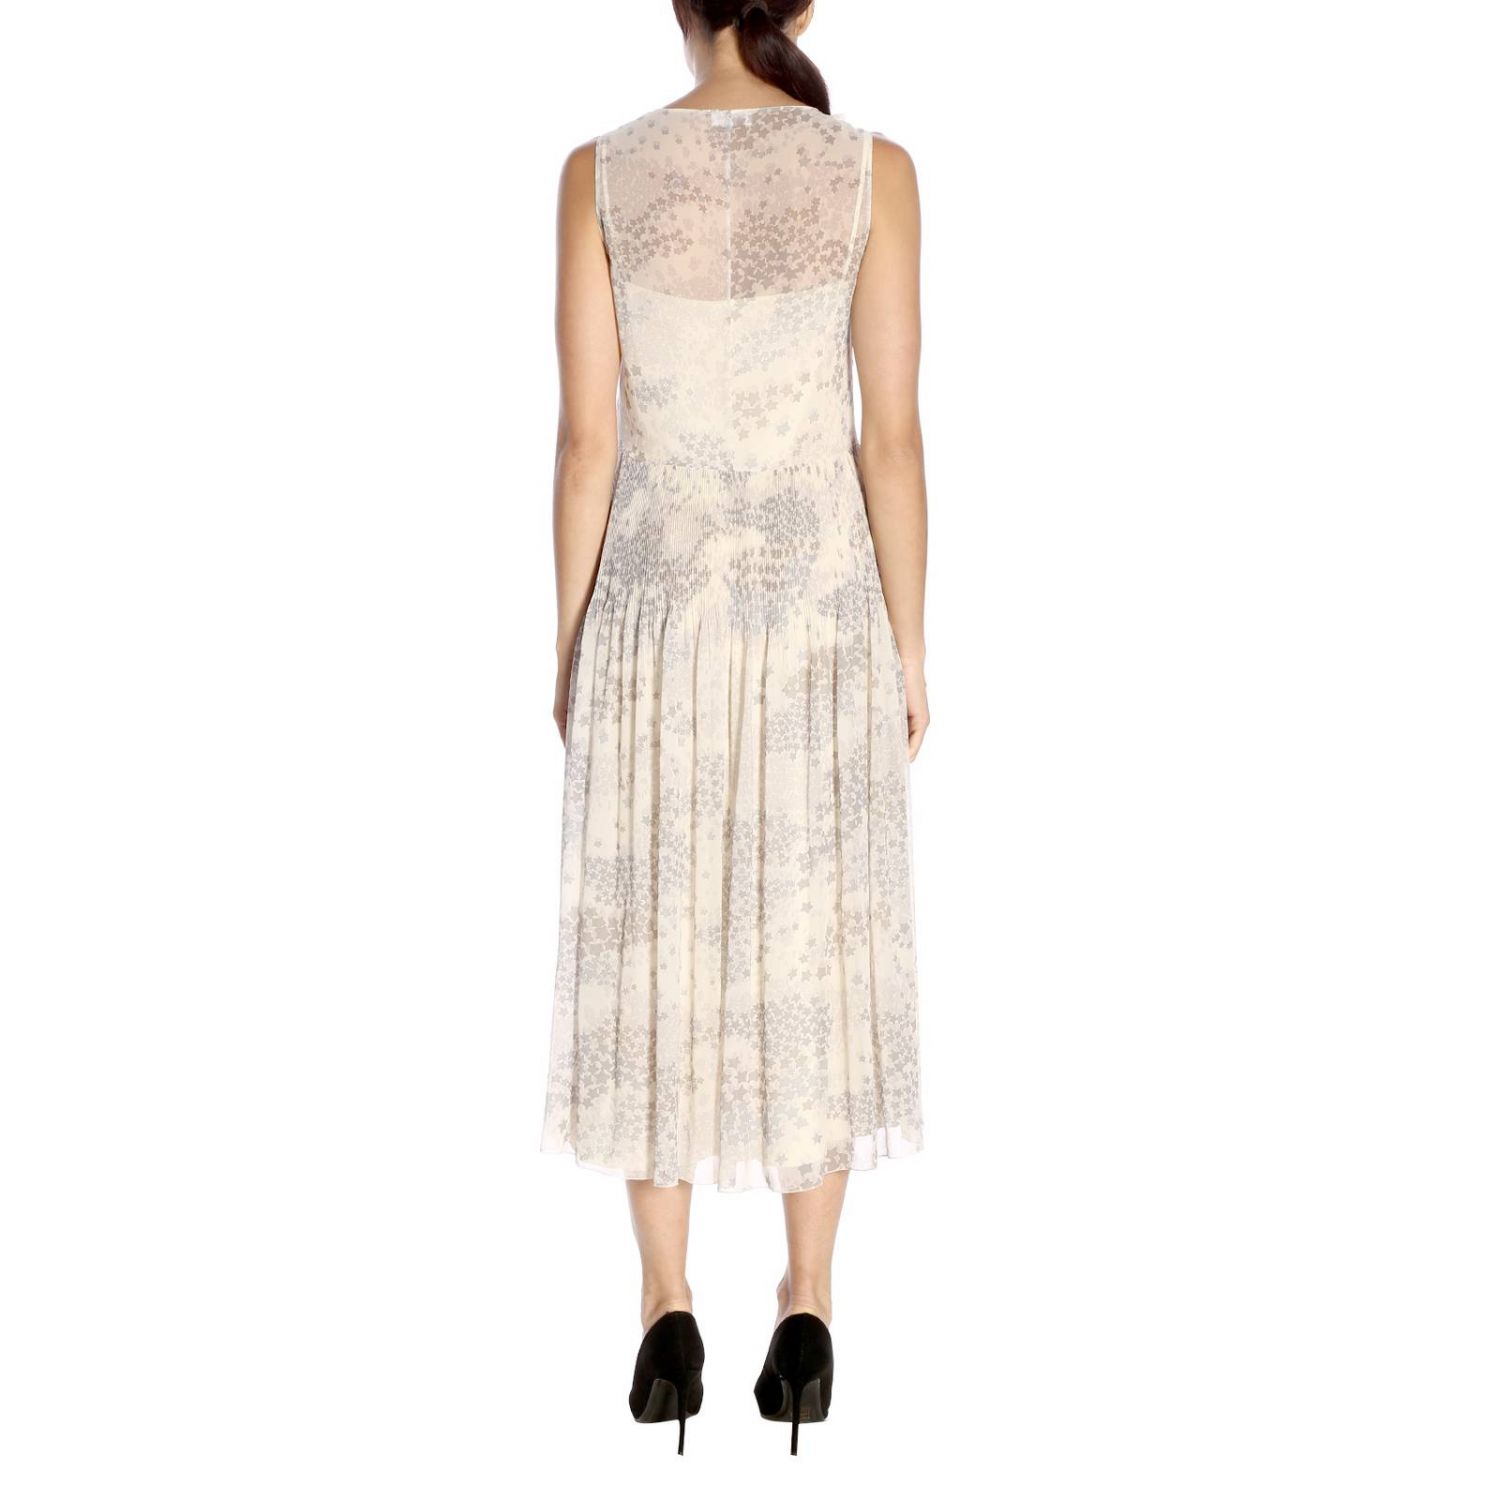 Red Valentino Outlet: dress for woman - Grey | Red Valentino dress ...